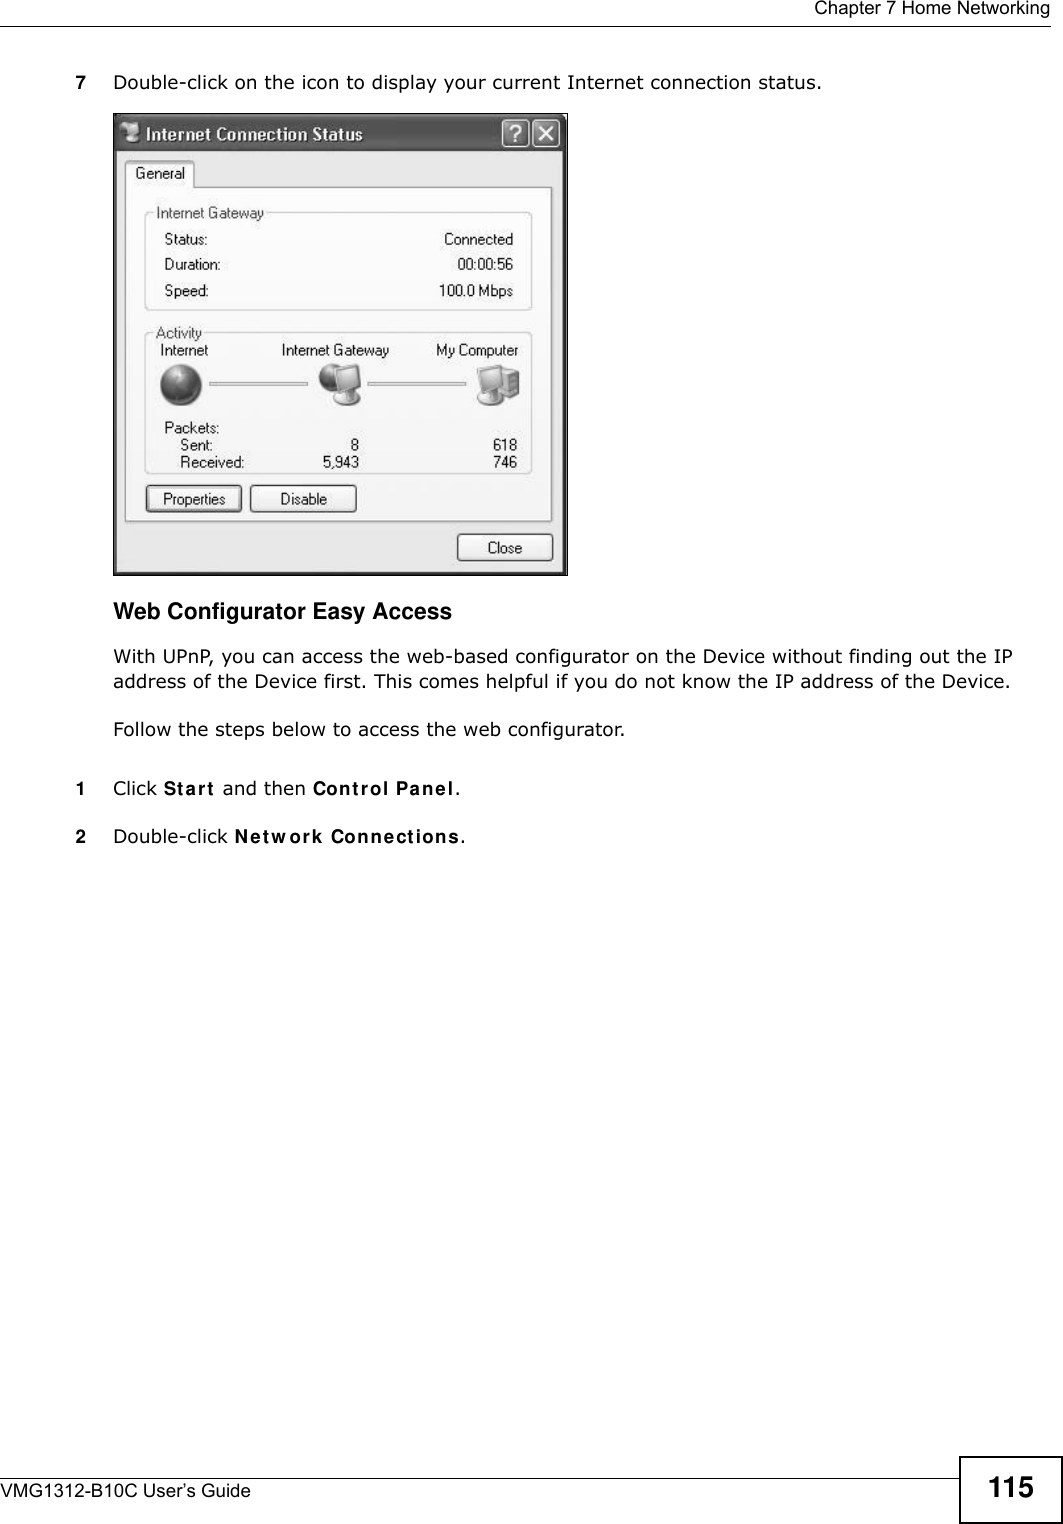  Chapter 7 Home NetworkingVMG1312-B10C User’s Guide 1157Double-click on the icon to display your current Internet connection status.Internet Conn ection StatusWeb Configurator Easy AccessWith UPnP, you can access the web-based configurator on the Device without finding out the IP address of the Device first. This comes helpful if you do not know the IP address of the Device.Follow the steps below to access the web configurator.1Click St a r t  and then Con t r ol Pa ne l. 2Double-click N e t w ork  Con n e ctions. 